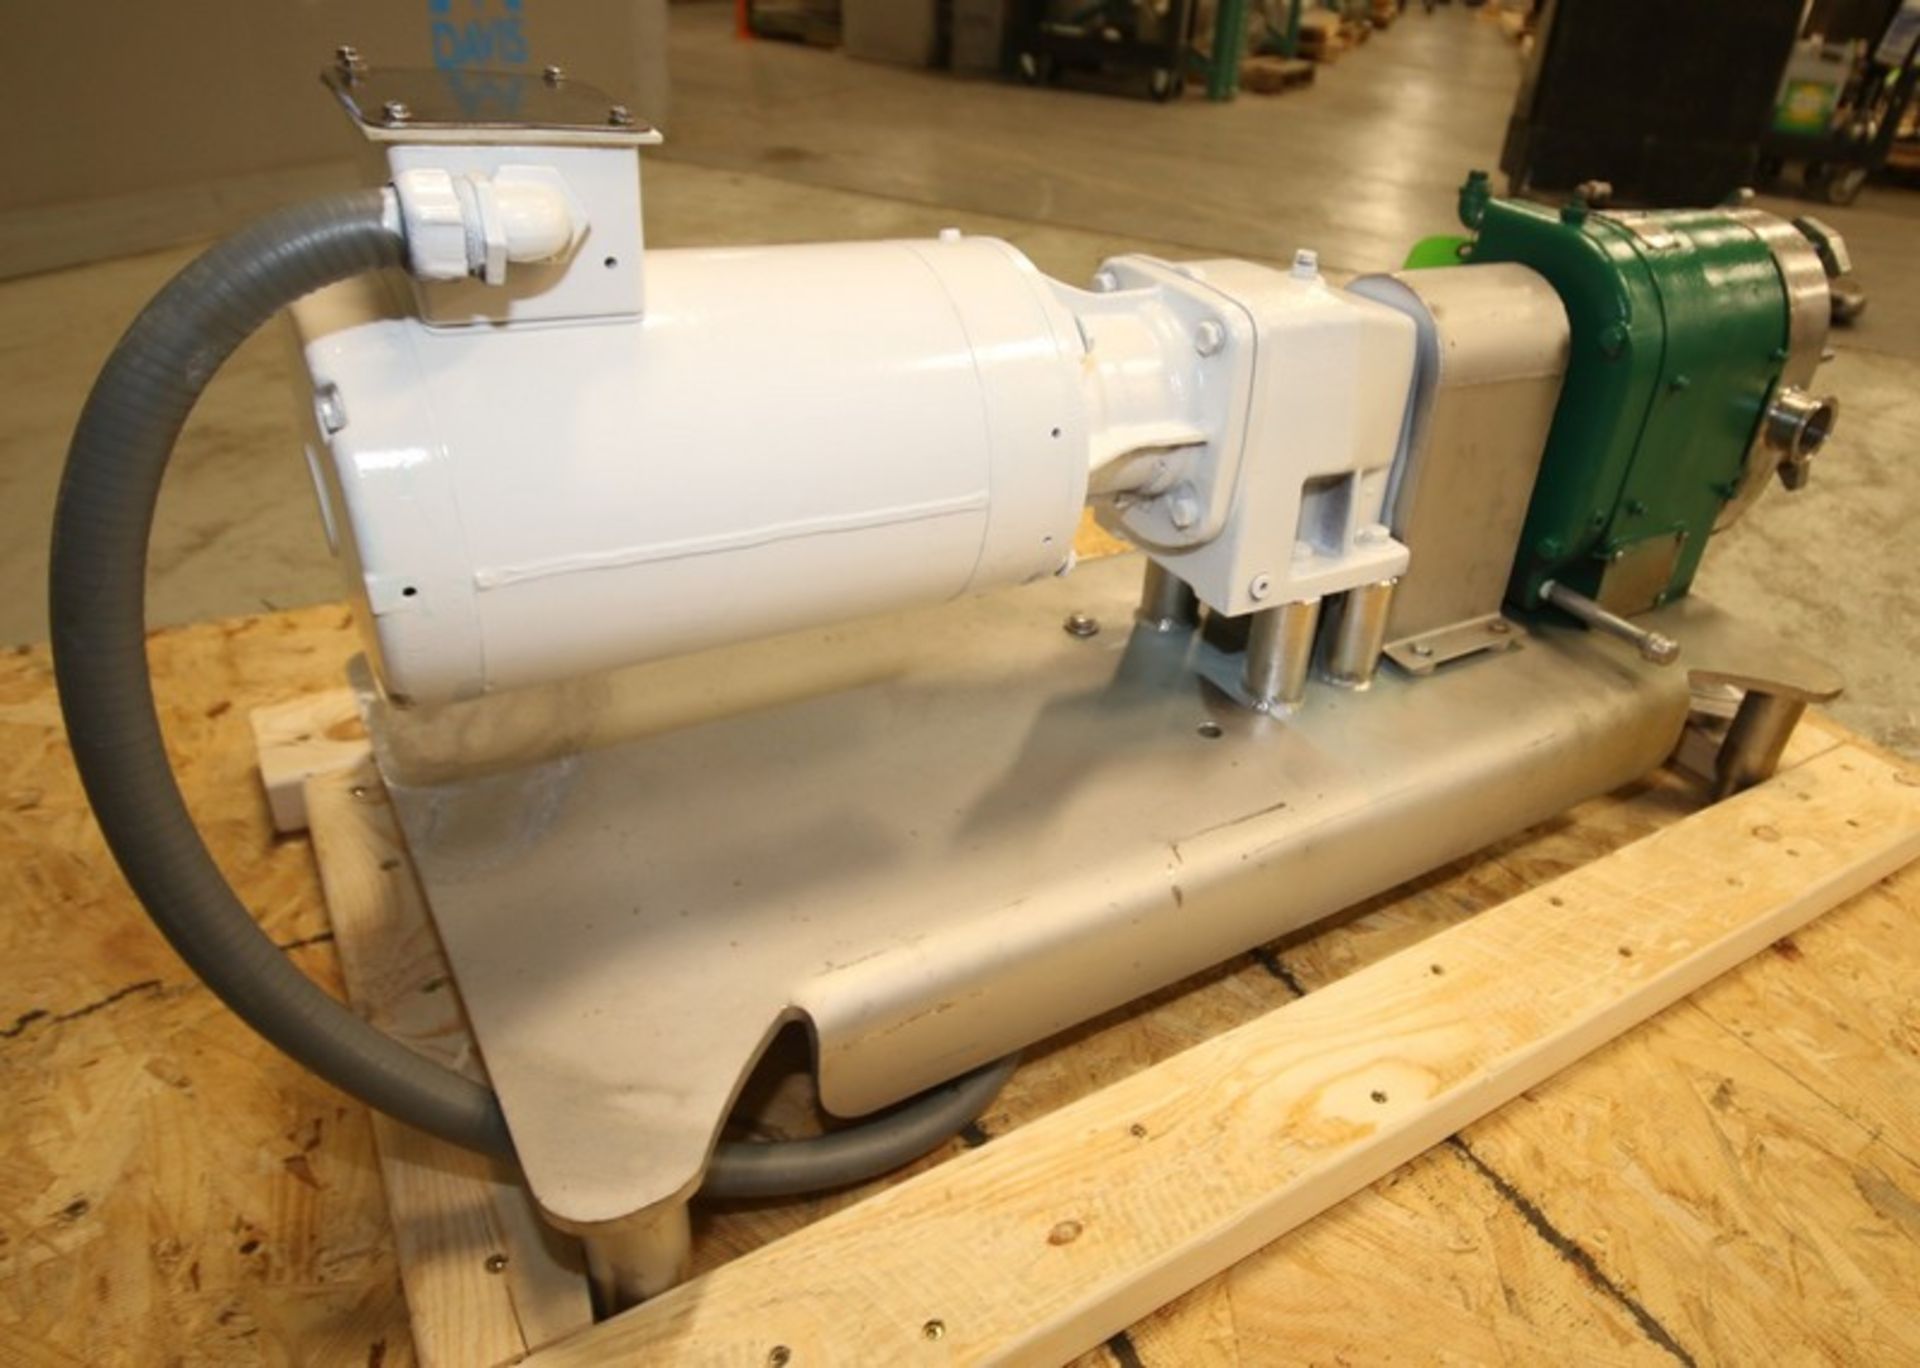 Tri Clover Positive Displacement Pump, Model PR25-1 1/2M-UC4-ST-S, S/N X3883, with 1 1/2" CT Head - Image 6 of 10